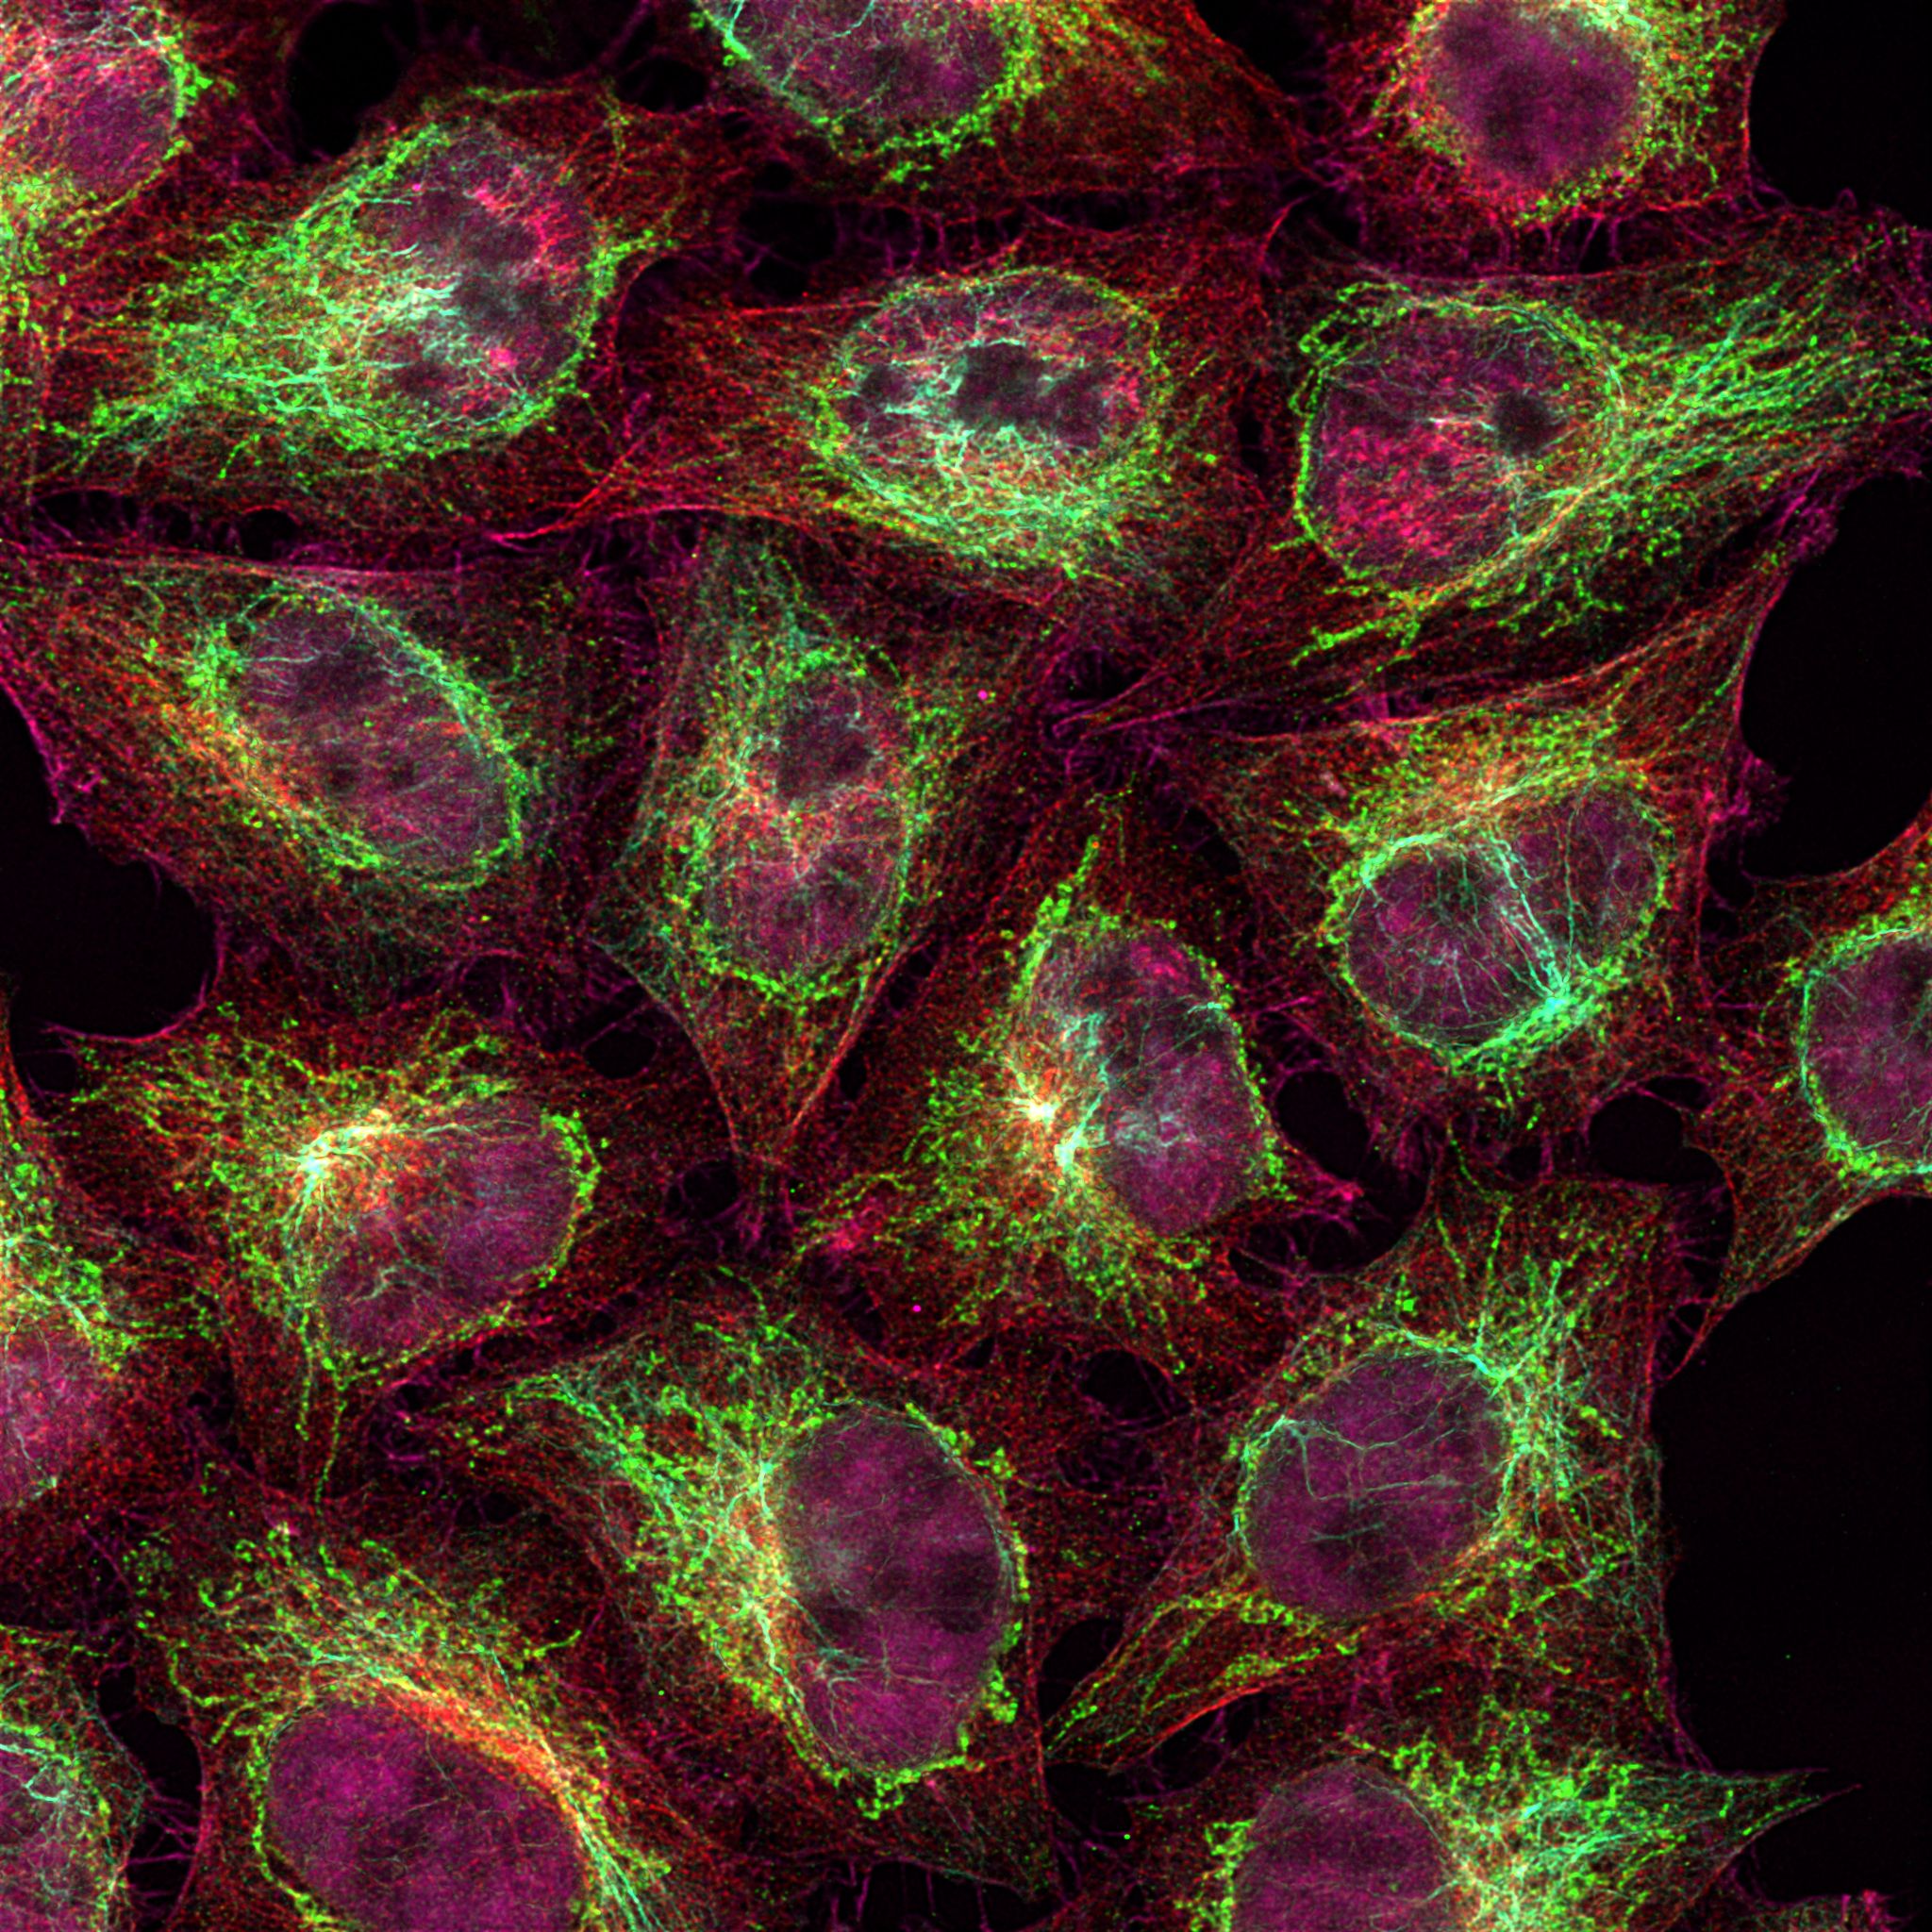 Immunofluorescence of HeLa: PFA-fixed HeLa cells were stained with anti-Vimentin labeled with FlexAble CoraLite® Plus 405 Kit (KFA026, cyan), anti-HSP60 (66041-1-Ig) labeled with FlexAble CoraLite® Plus 488 Kit (KFA021, green), anti-Tubulin (66240-1-lg) labeled with FlexAble CoraLite® Plus 555 Kit (KFA042, red) and anti-HNRNPA2B1 (67445-1-lg) labeled with FlexAble CoraLite® Plus 647 Kit (KFA043, magenta).
Confocal images were acquired with a 100x oil objective and post-processed. Images were recorded at the Core Facility Bioimaging at the Biomedical Center, LMU Munich.